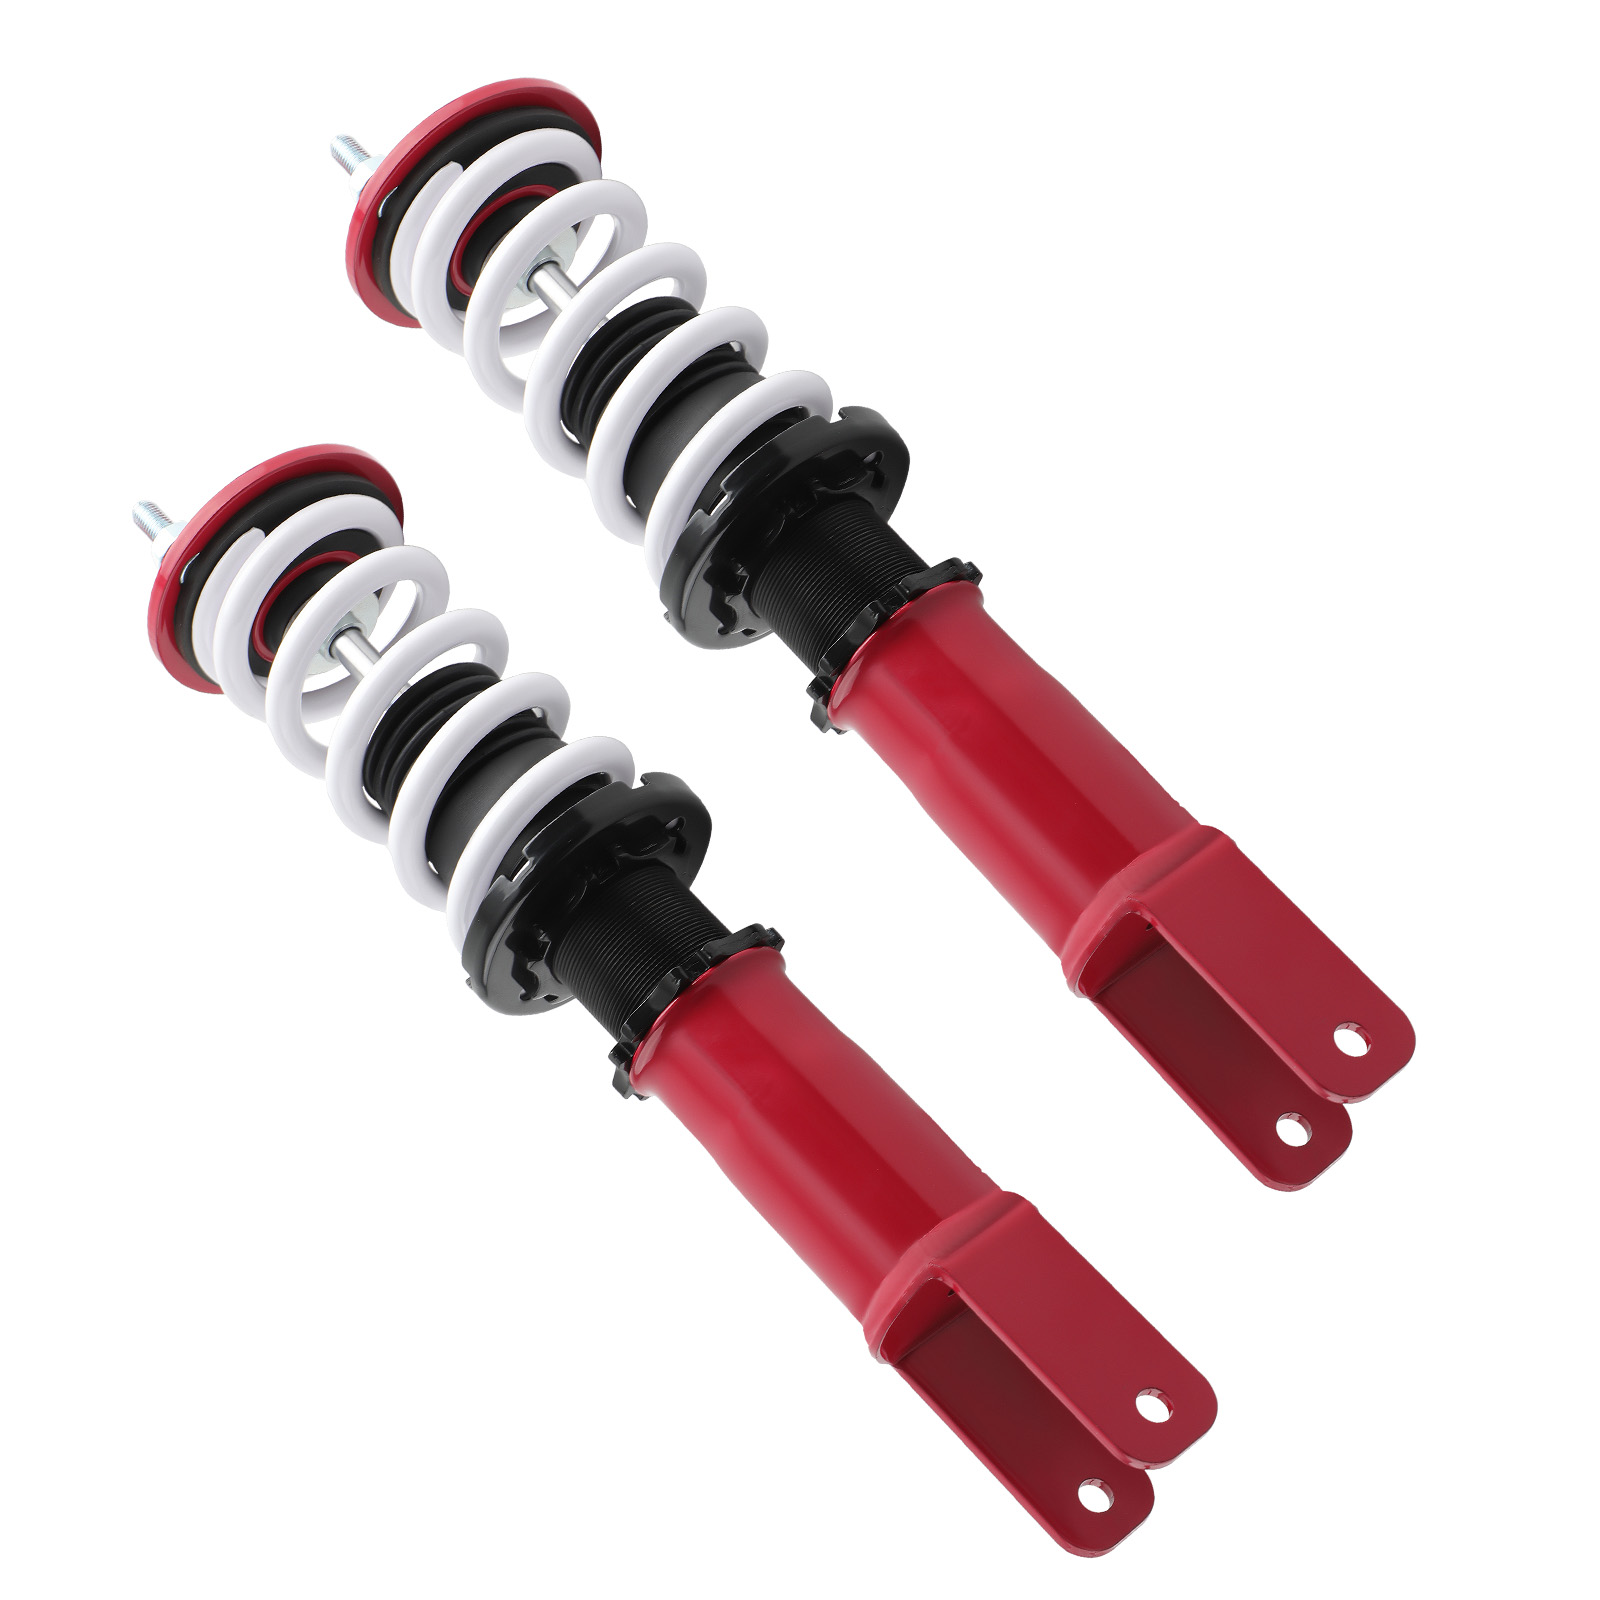 BFO Coilovers Coil Spring Shock Absorbers Kit For Honda Civic 1992-2000